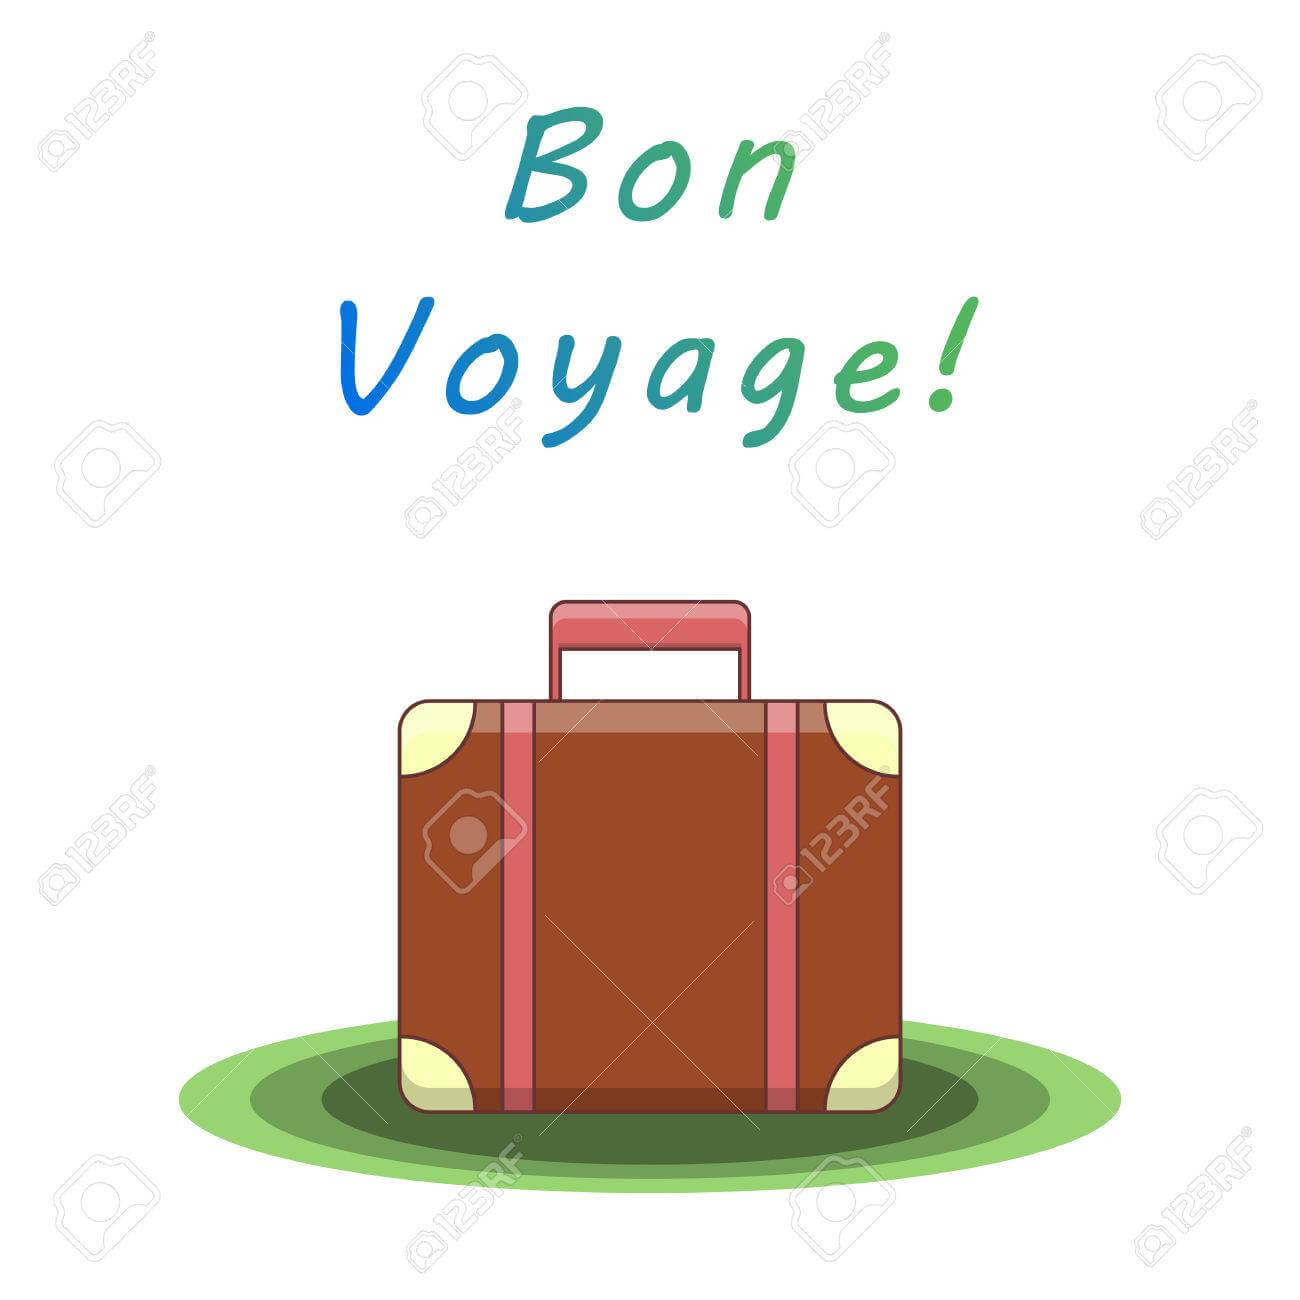 Bon Voyage. Suitcase For Traveling. Template For Card, Flyer,.. With Bon Voyage Card Template